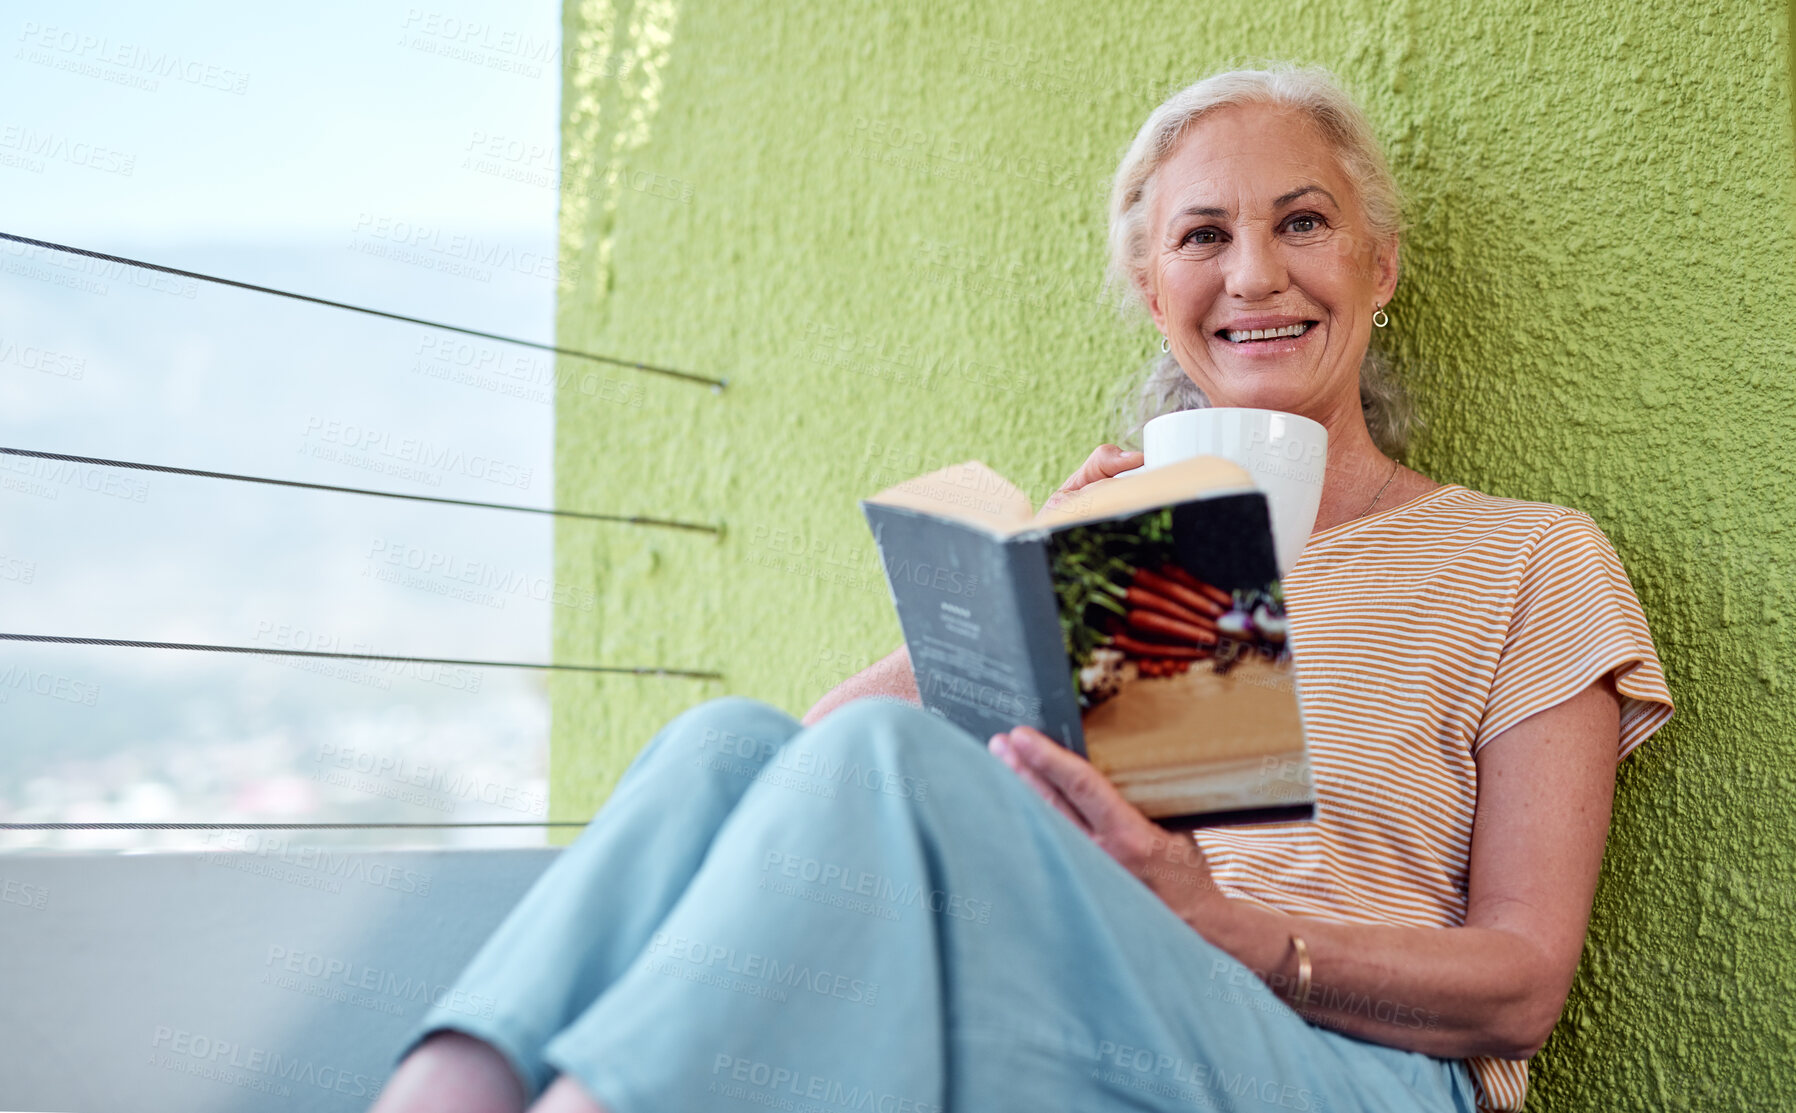 Buy stock photo Shot of a mature woman reading a book and having coffee on her balcony at home